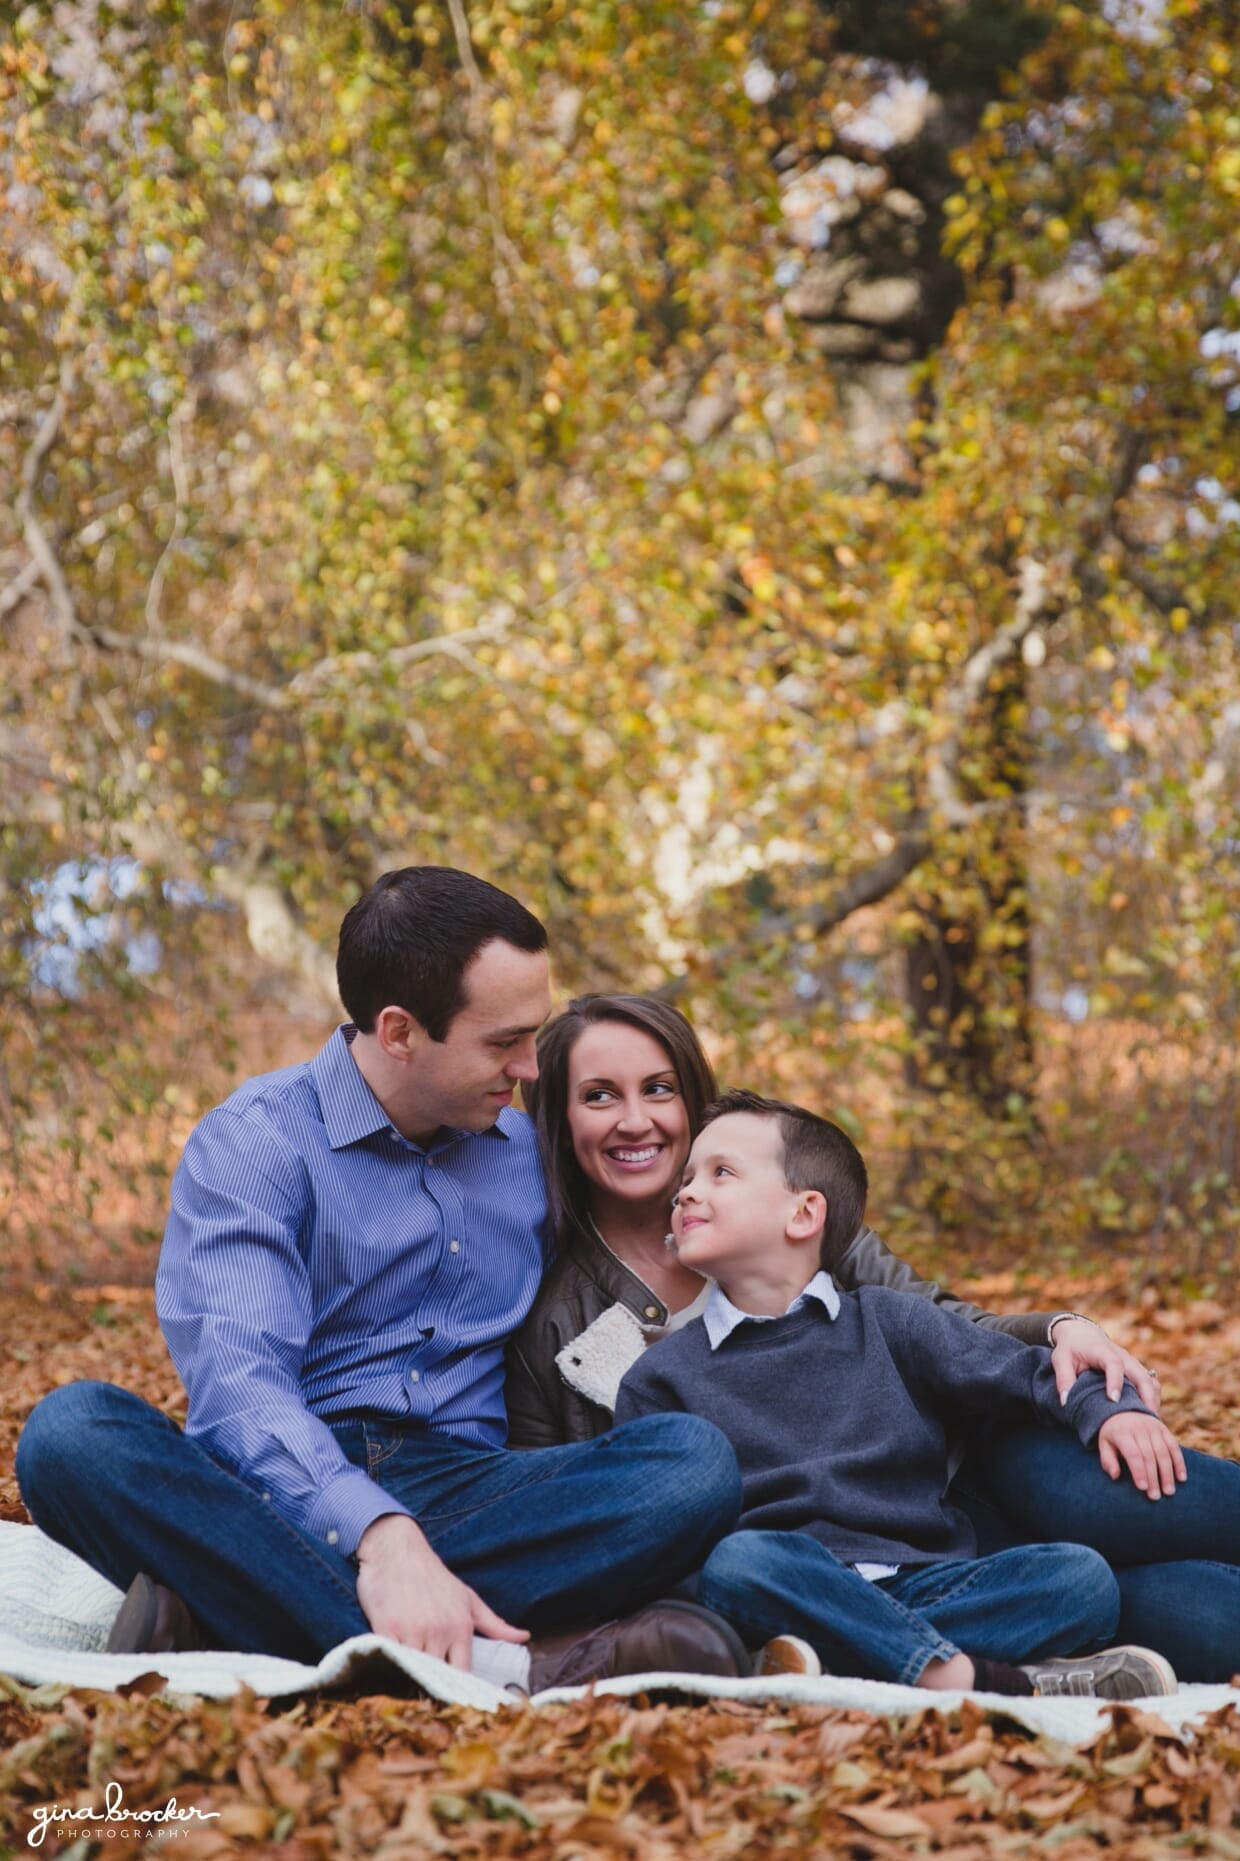 A family sit together on a blanket during their fall family photo session at the Arnold Arboretum in Boston, Massachusetts